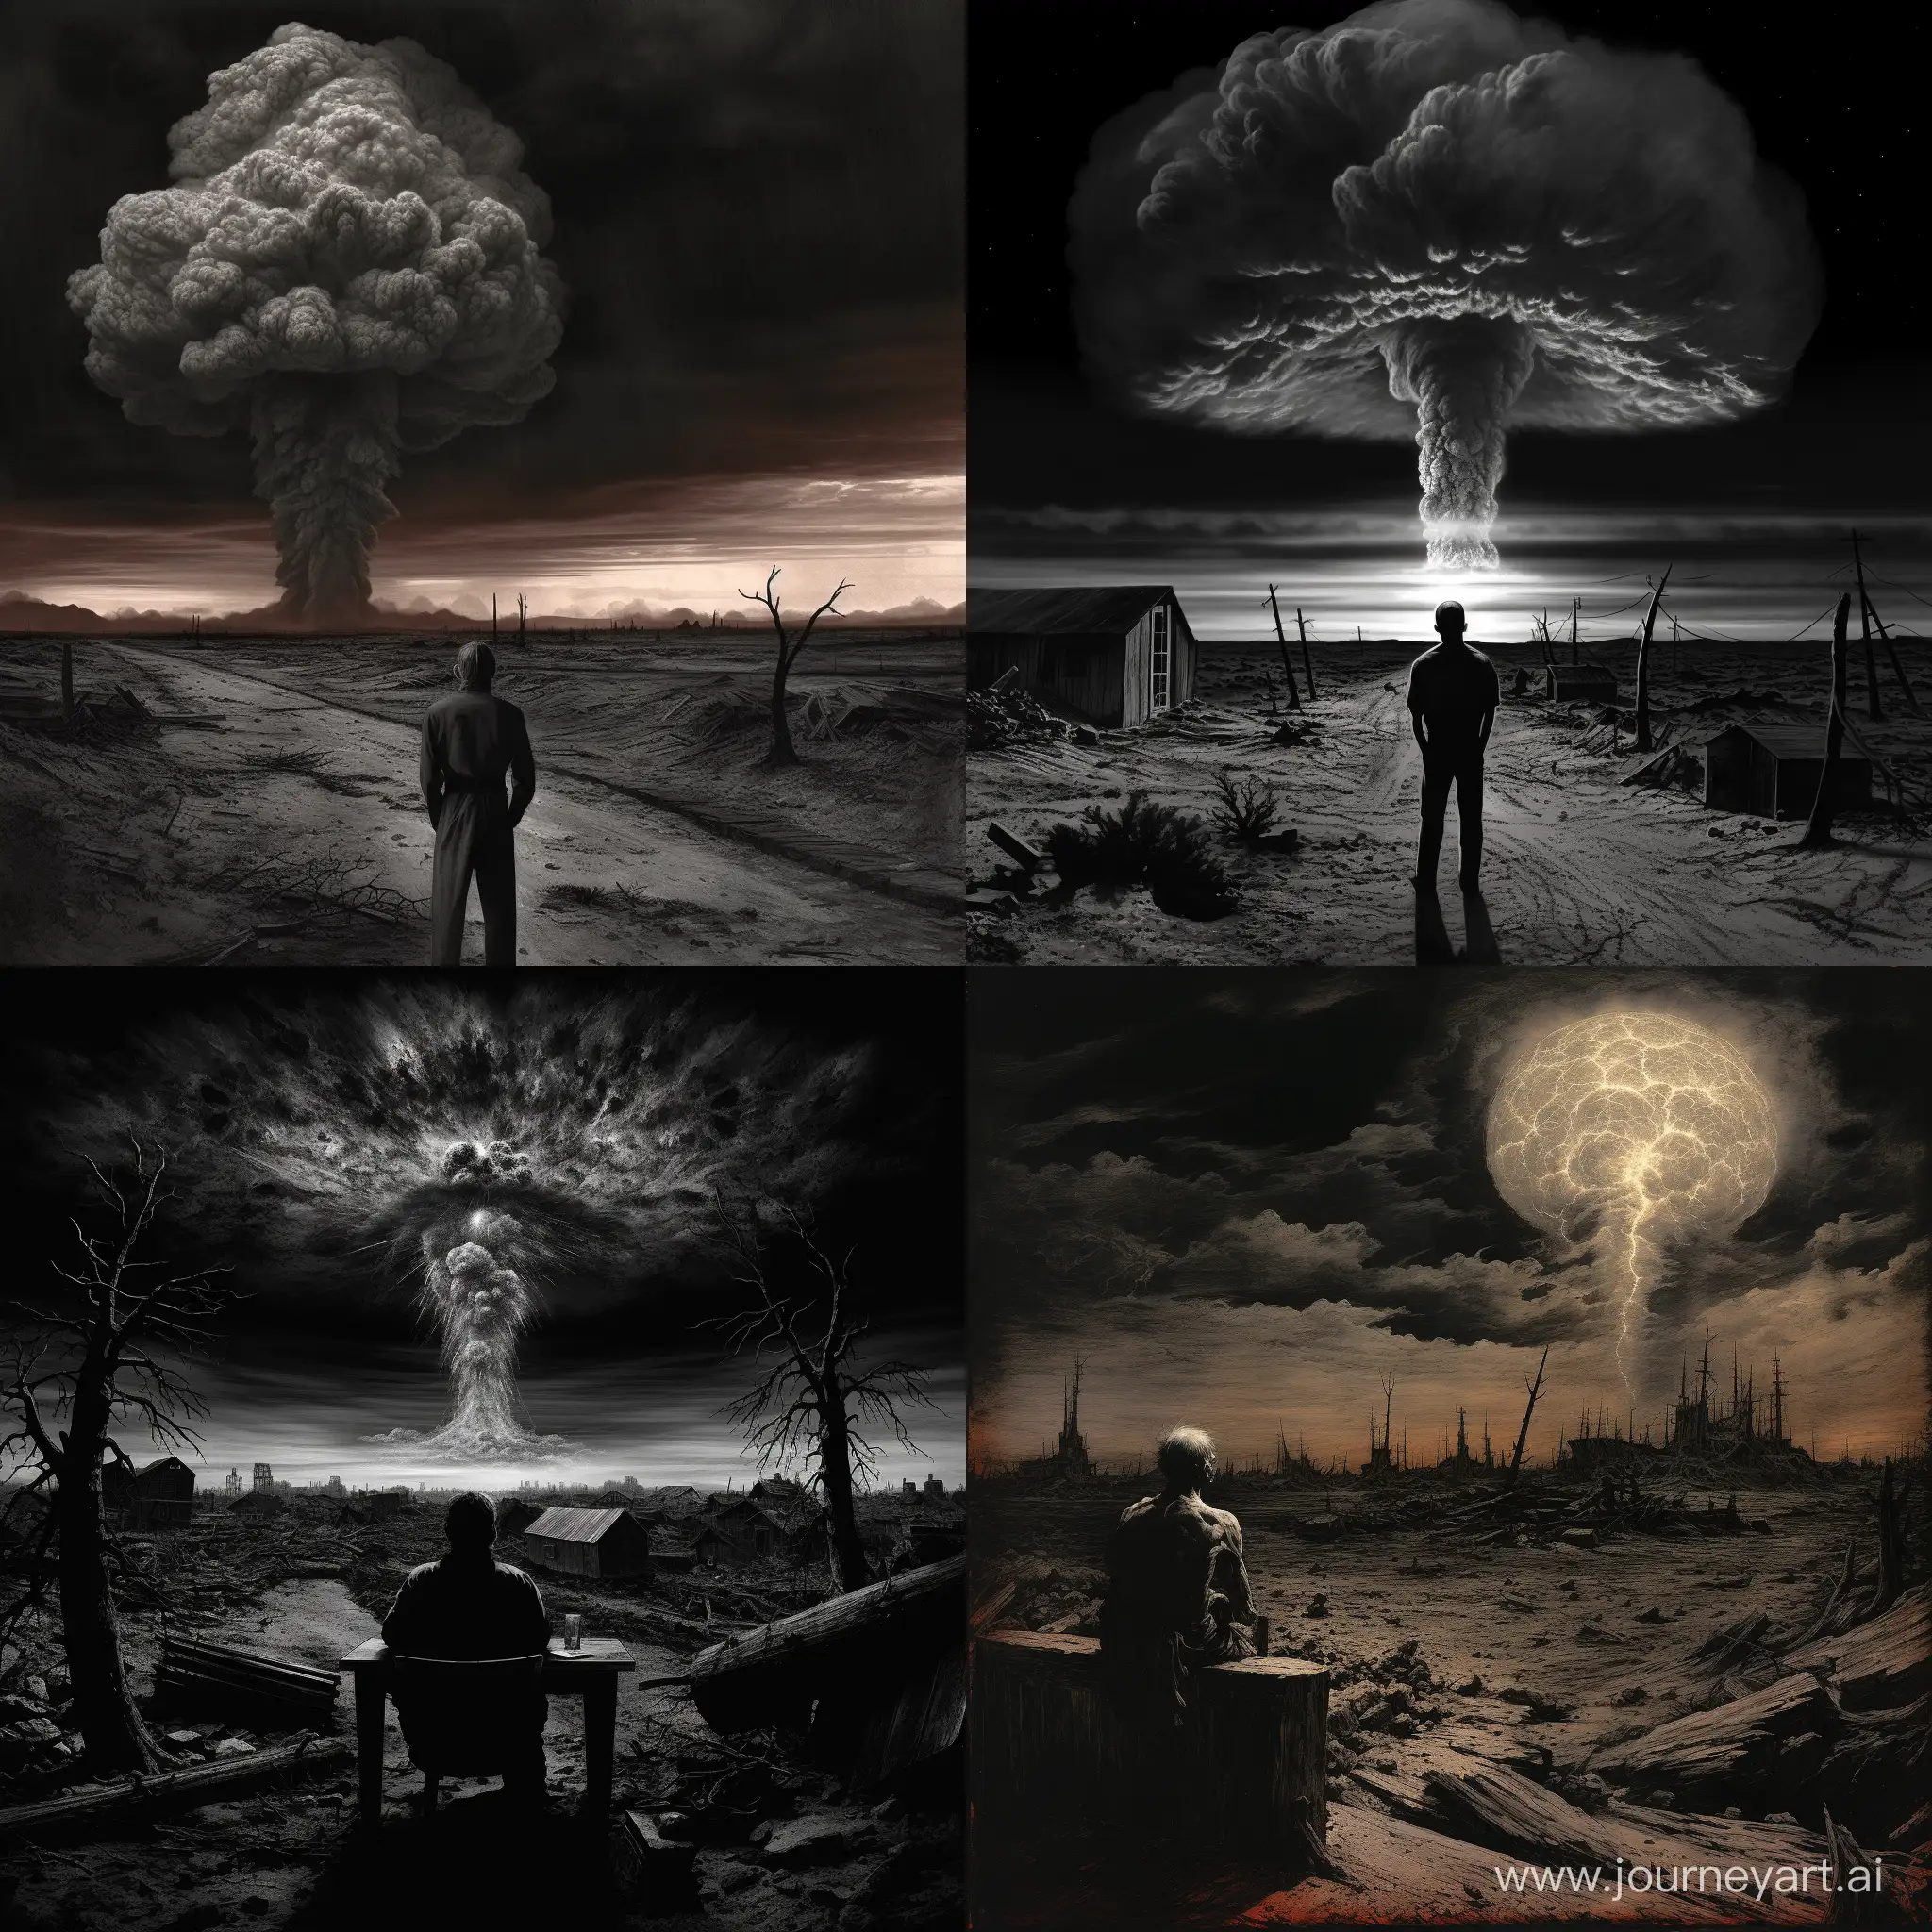 1940s-Nuclear-Bomb-Spectacle-Dark-Realistic-Sketch-of-American-Man-Witnessing-Horror